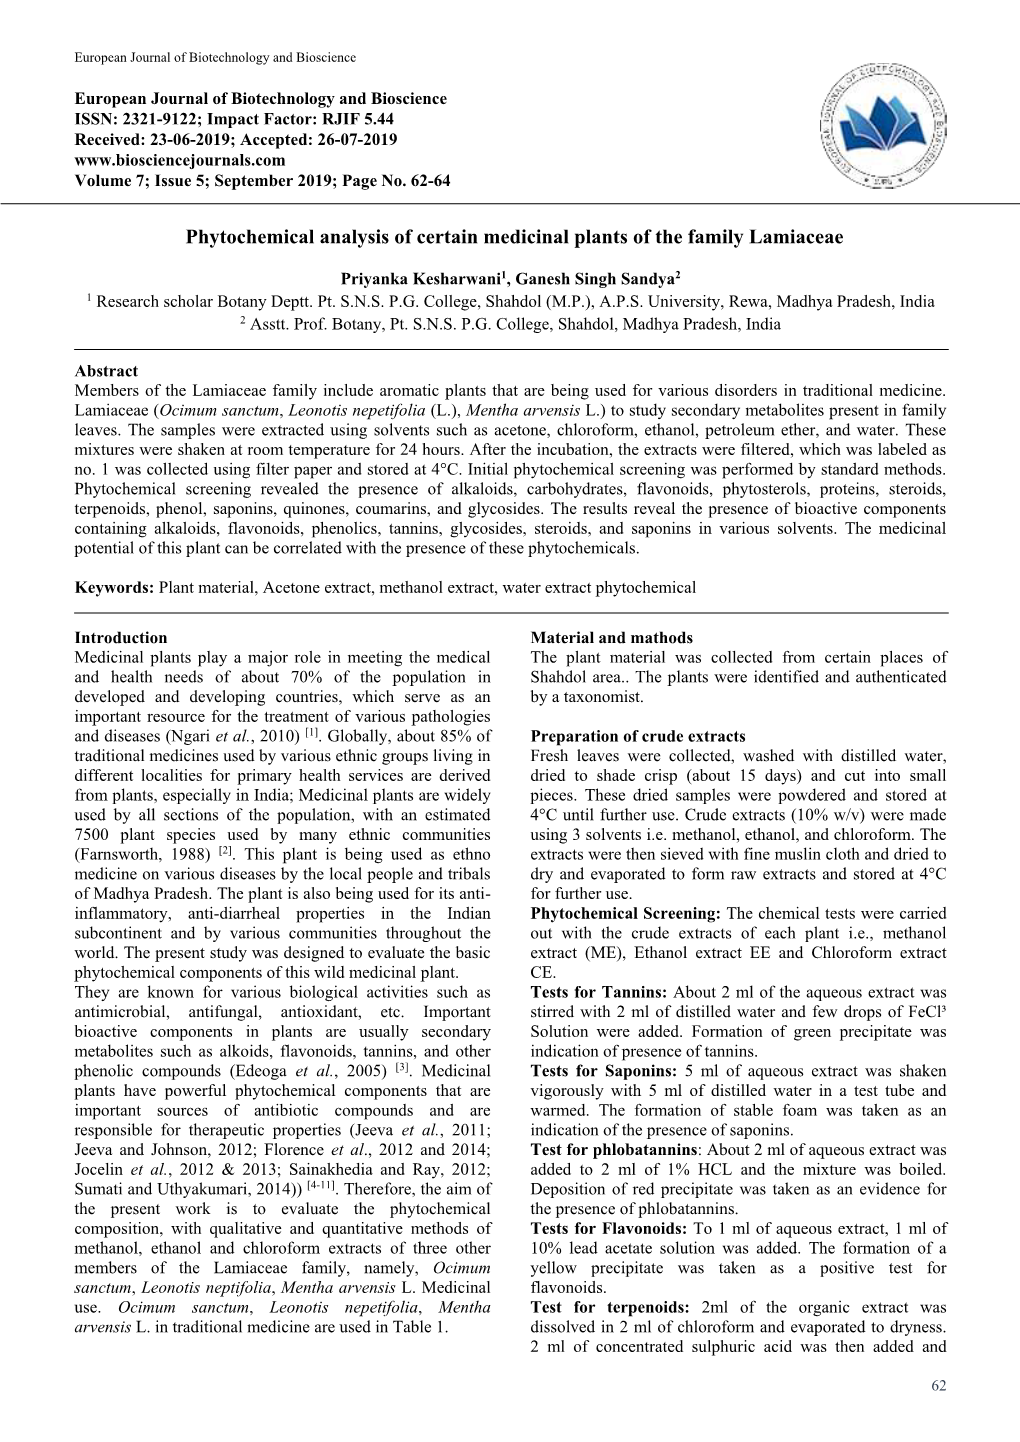 Phytochemical Analysis of Certain Medicinal Plants of the Family Lamiaceae